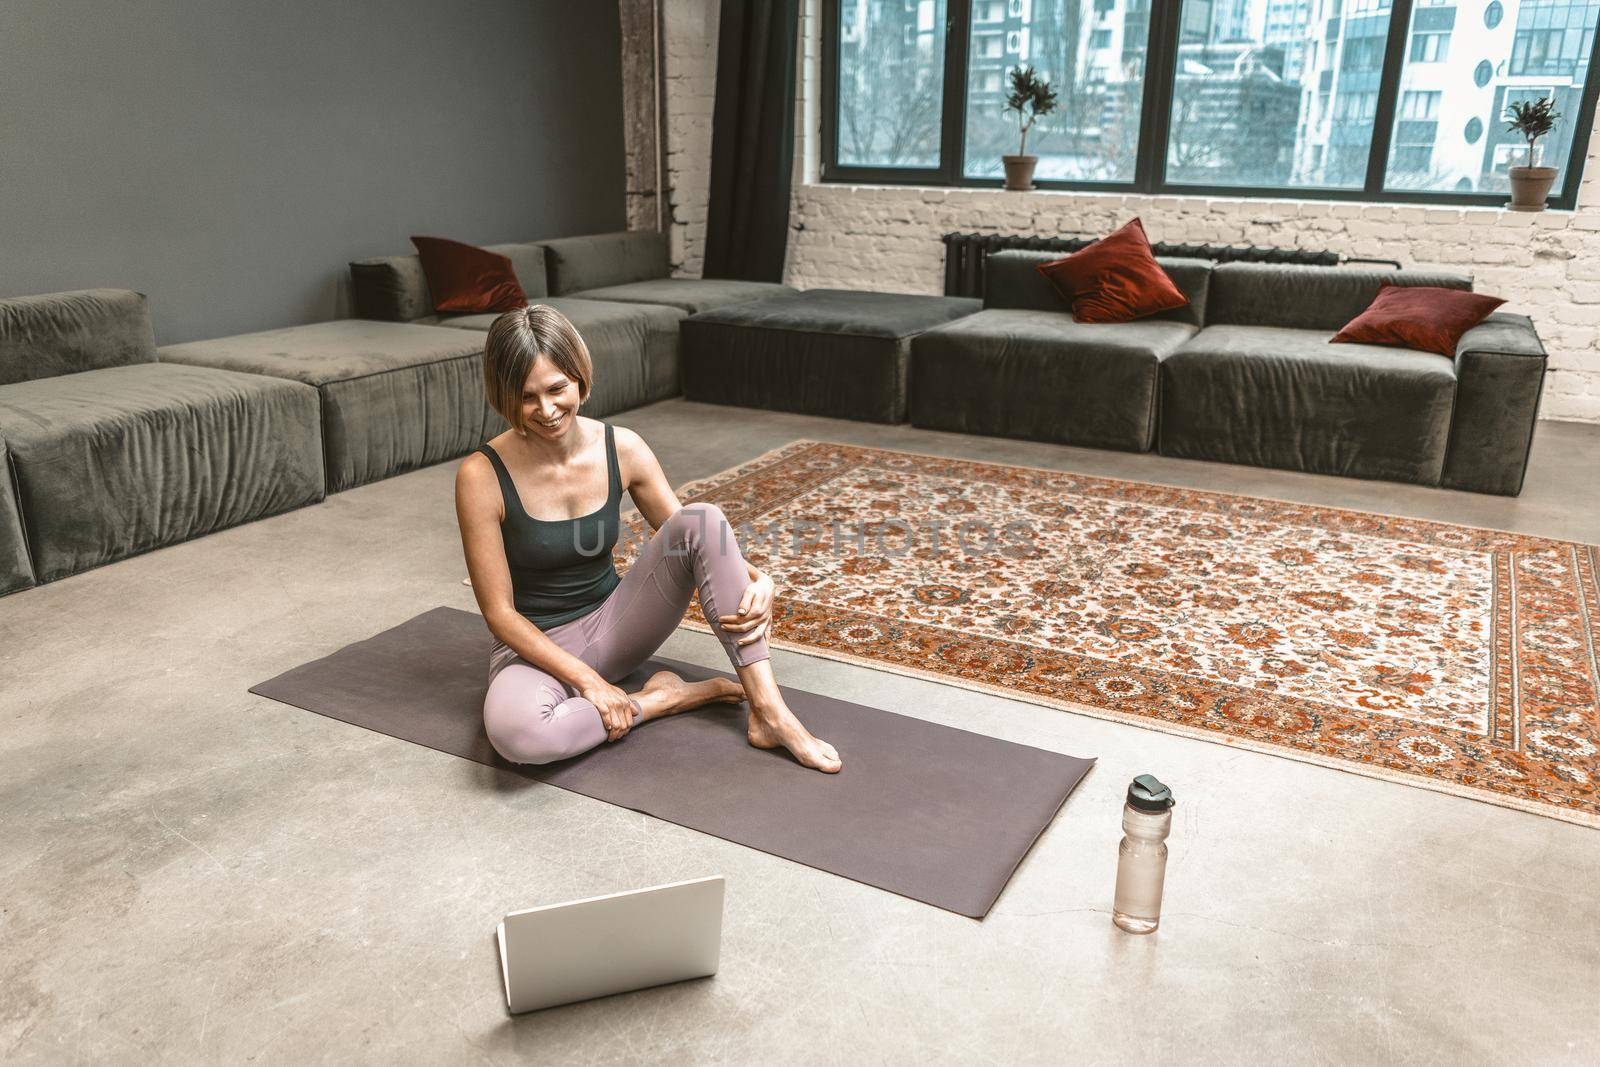 Sporty Woman Sits on a Sport Mat and Has an Online Video Chat with her Fitness Coach on Laptop During the Quarantine Period. Home Workouts. City Background. Close-up. High quality photo